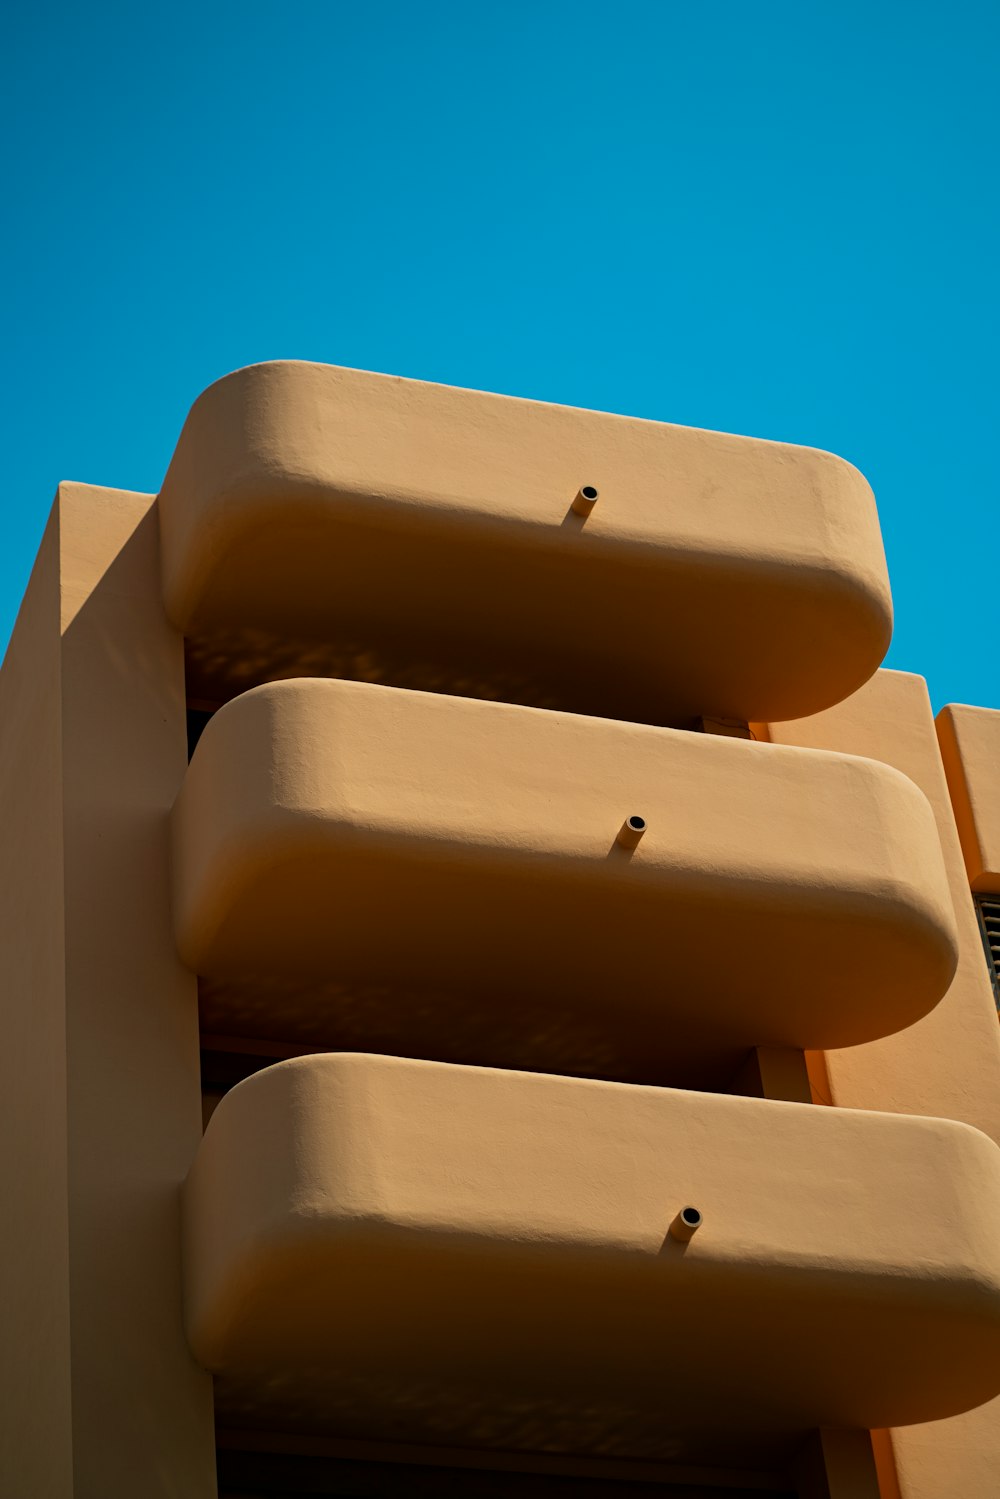 a tan building with a blue sky in the background